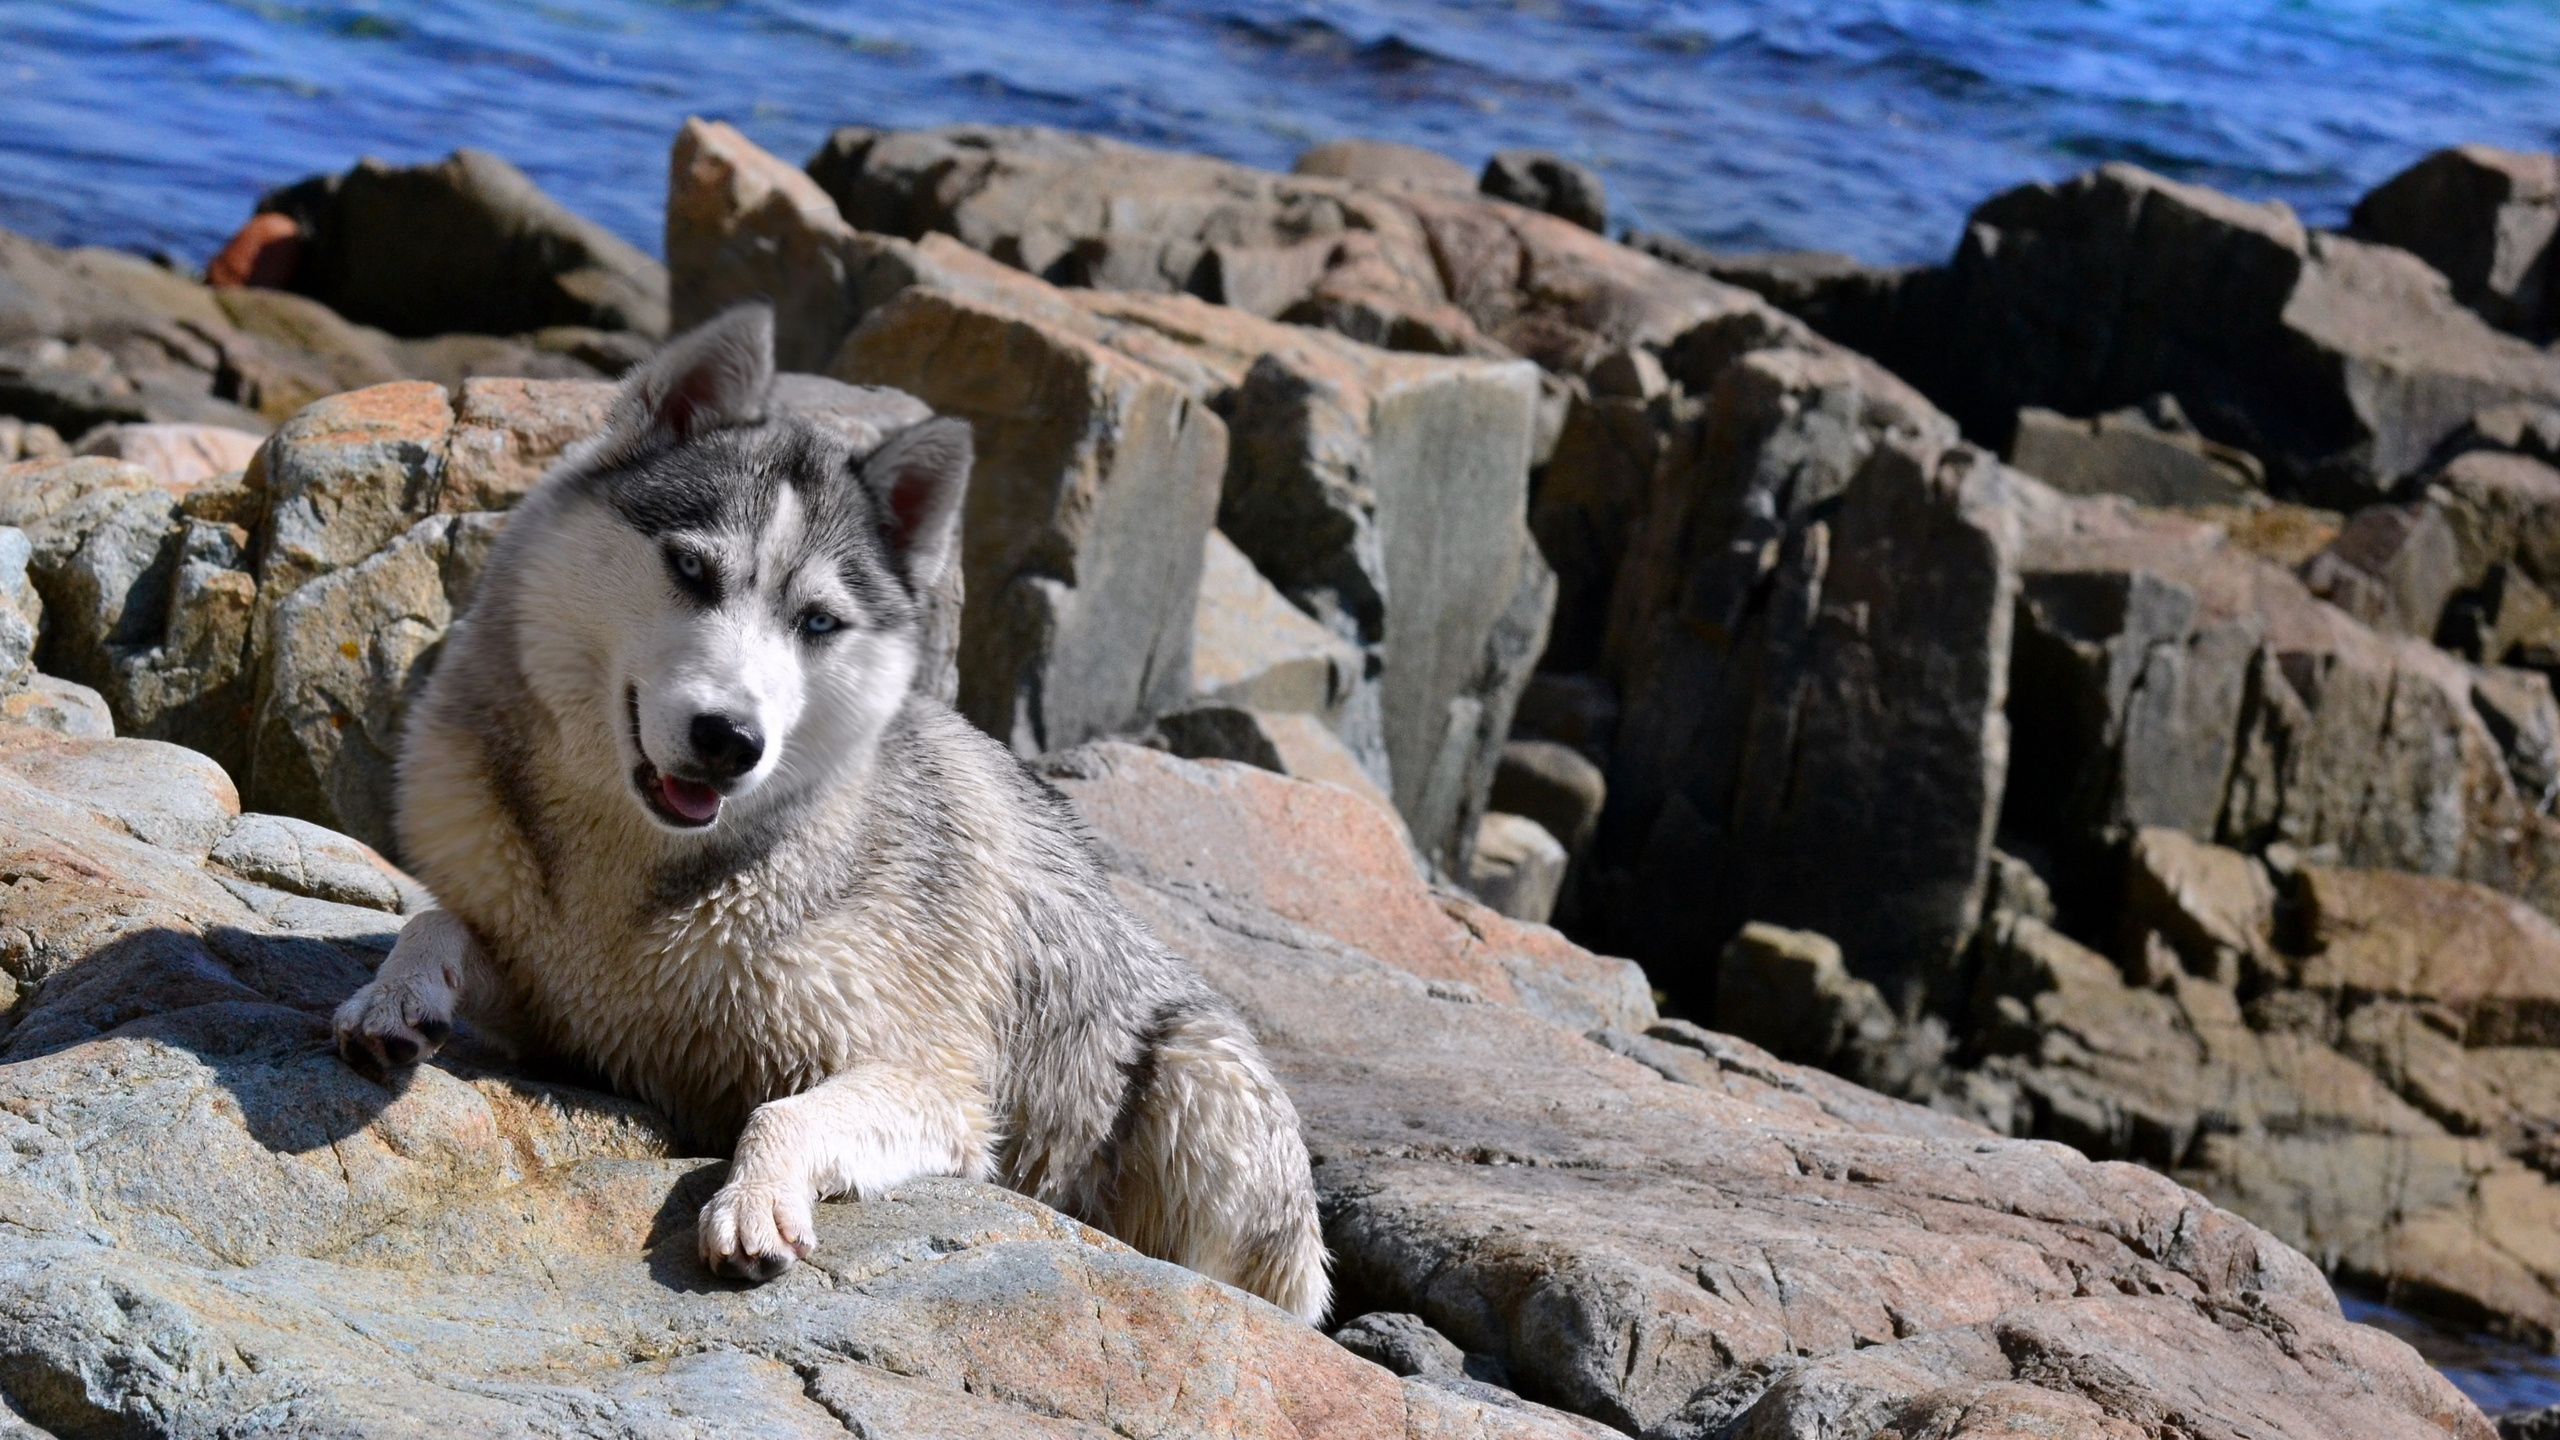 White Siberian Husky on Rock Formation Near Body of Water During Daytime. Wallpaper in 2560x1440 Resolution